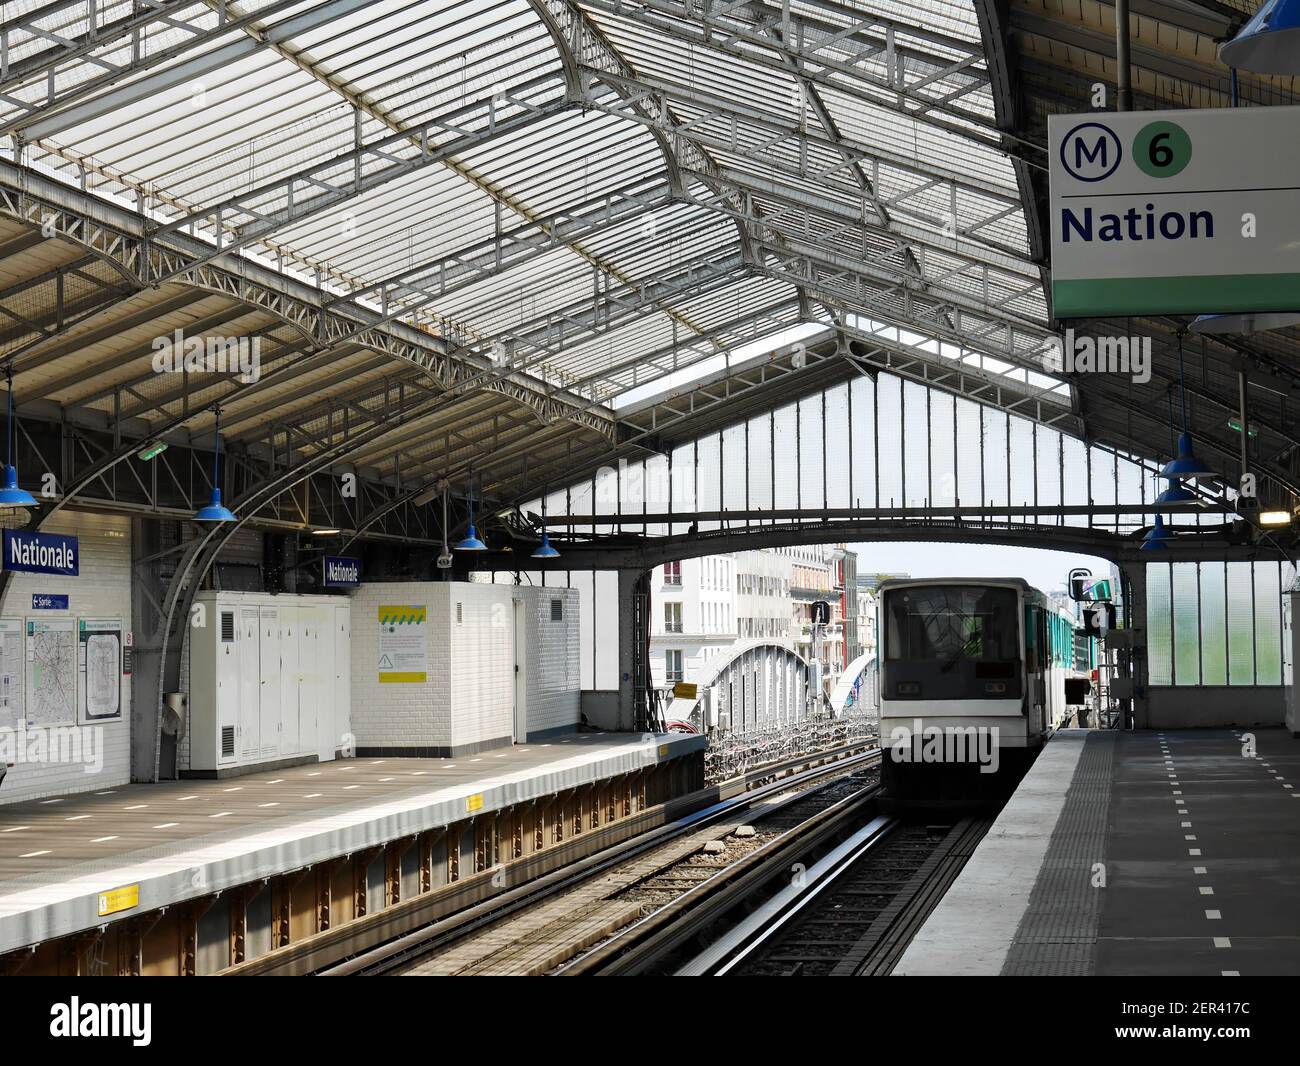 Metro station 'Nationale' in Paris. The train departs from the platform. Maps, direction of movement are visible on the walls. Stock Photo